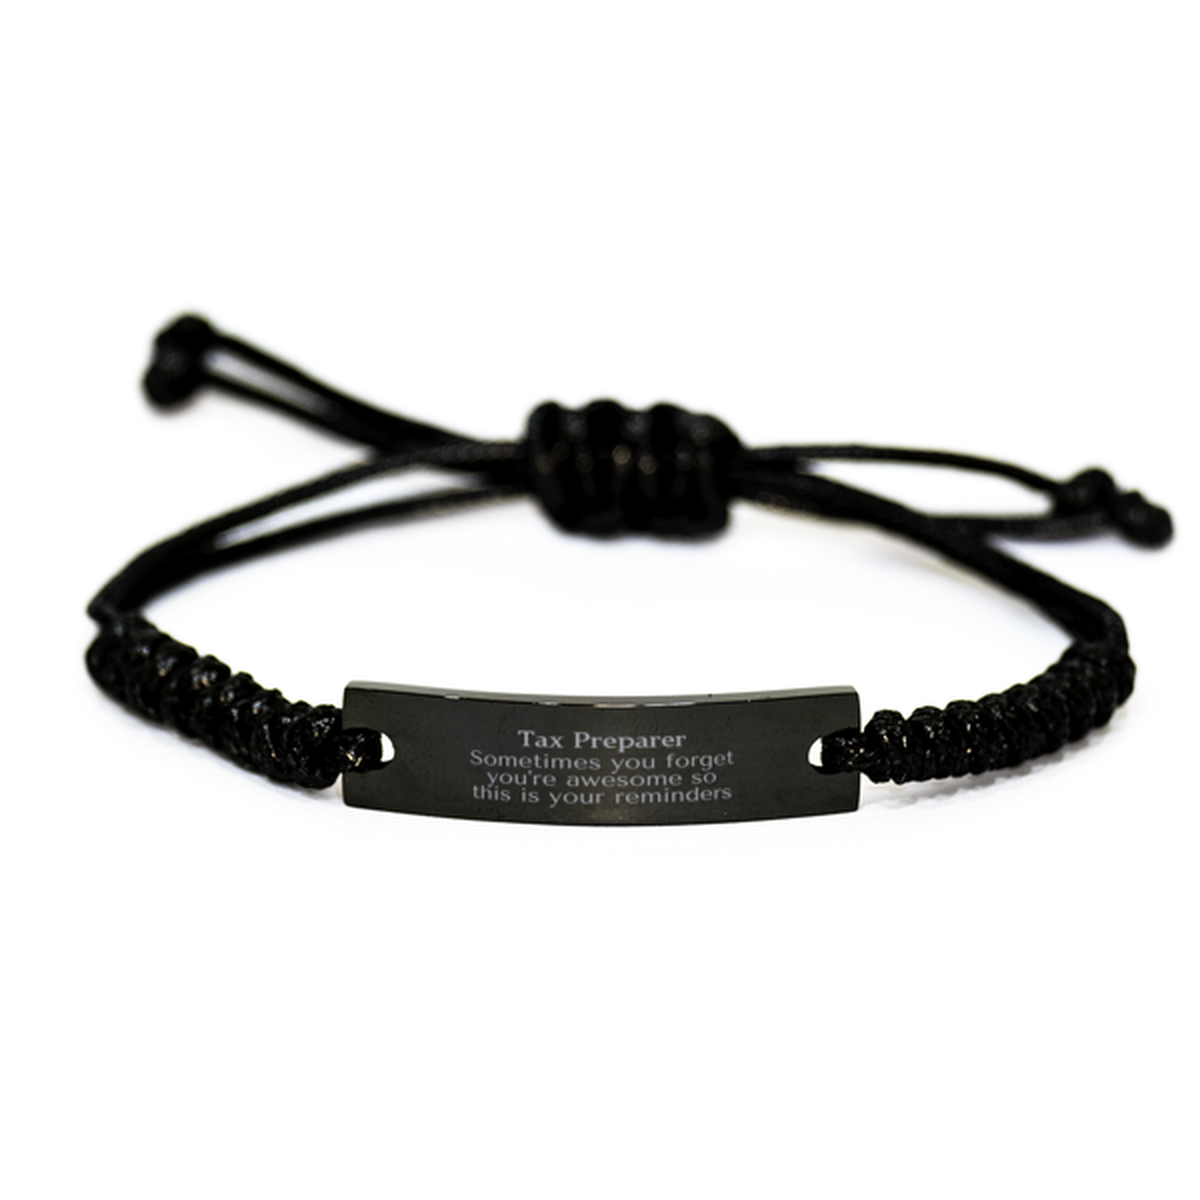 Sentimental Tax Preparer Black Rope Bracelet, Tax Preparer Sometimes you forget you're awesome so this is your reminders, Graduation Christmas Birthday Gifts for Tax Preparer, Men, Women, Coworkers